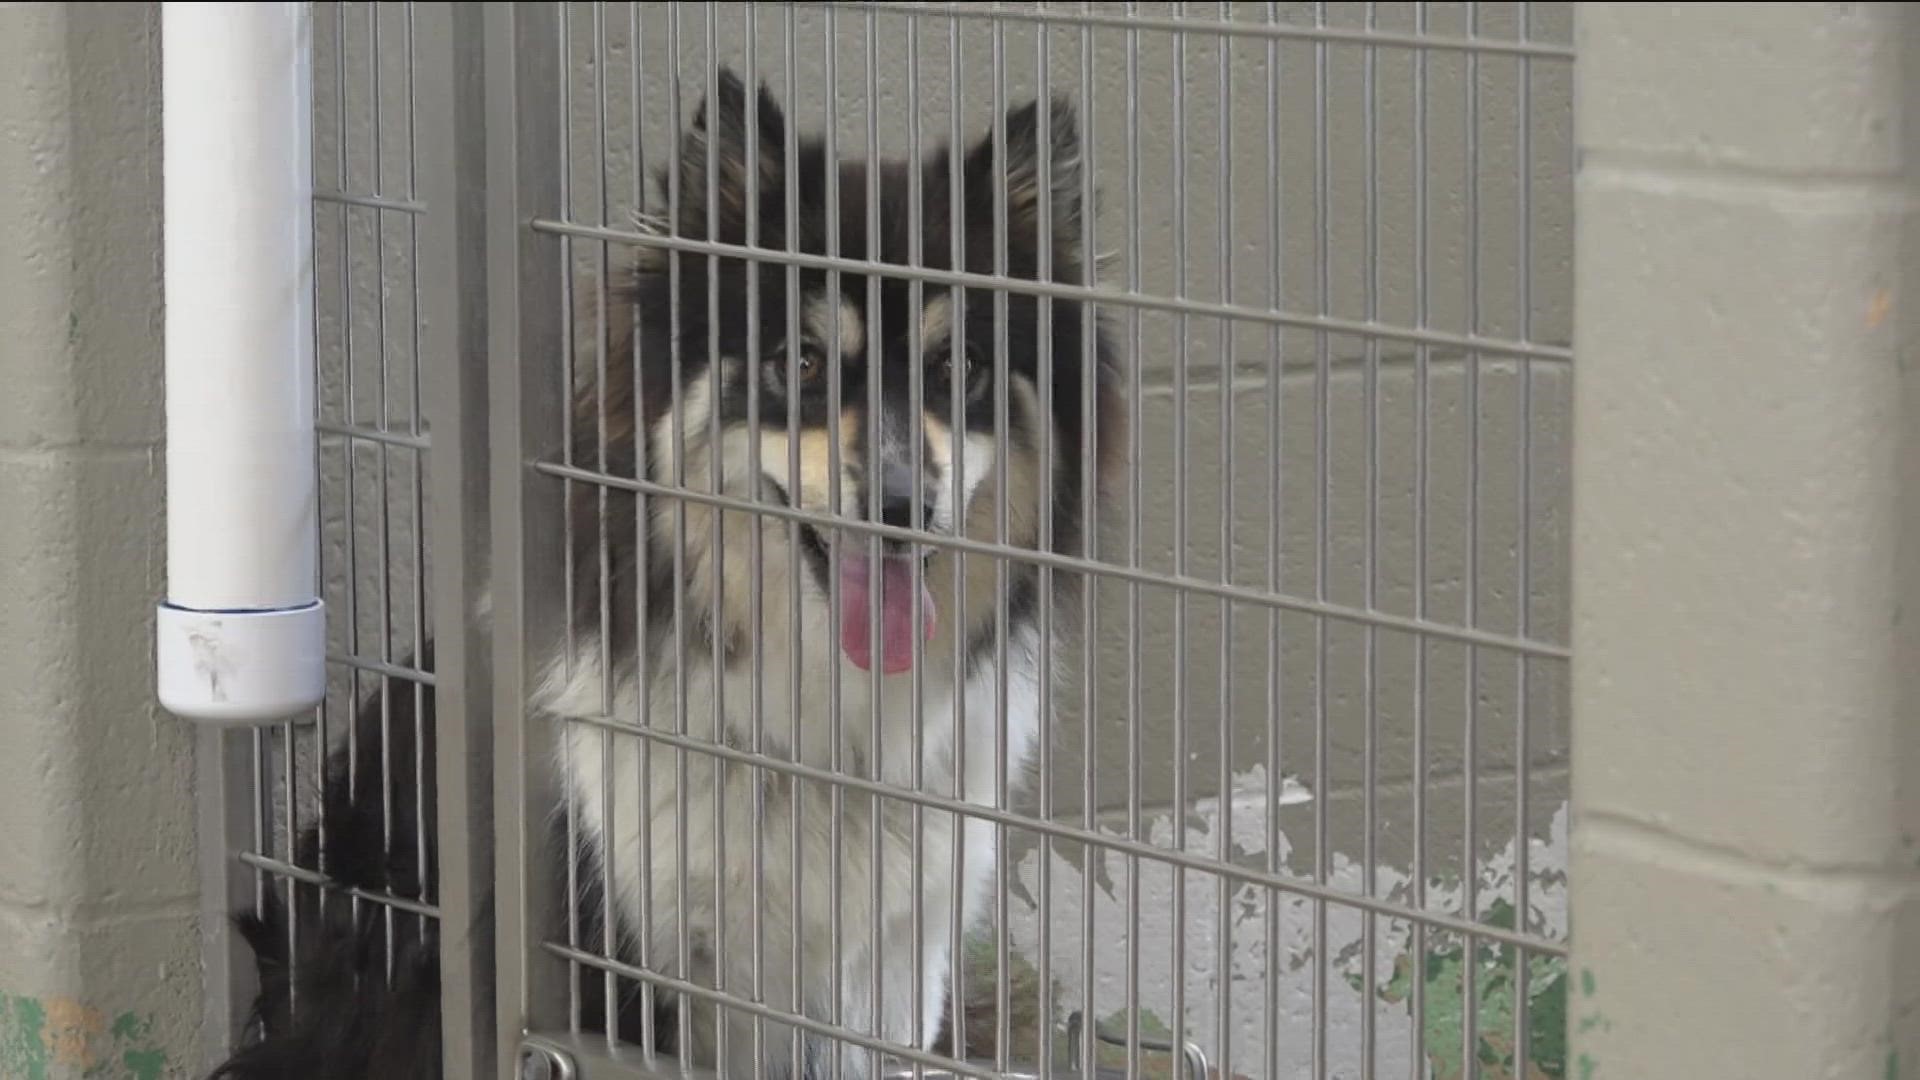 Sandusky County Dog Warden Kelly Pocock says earlier in August, her kennels were completely filled for the first time ever.